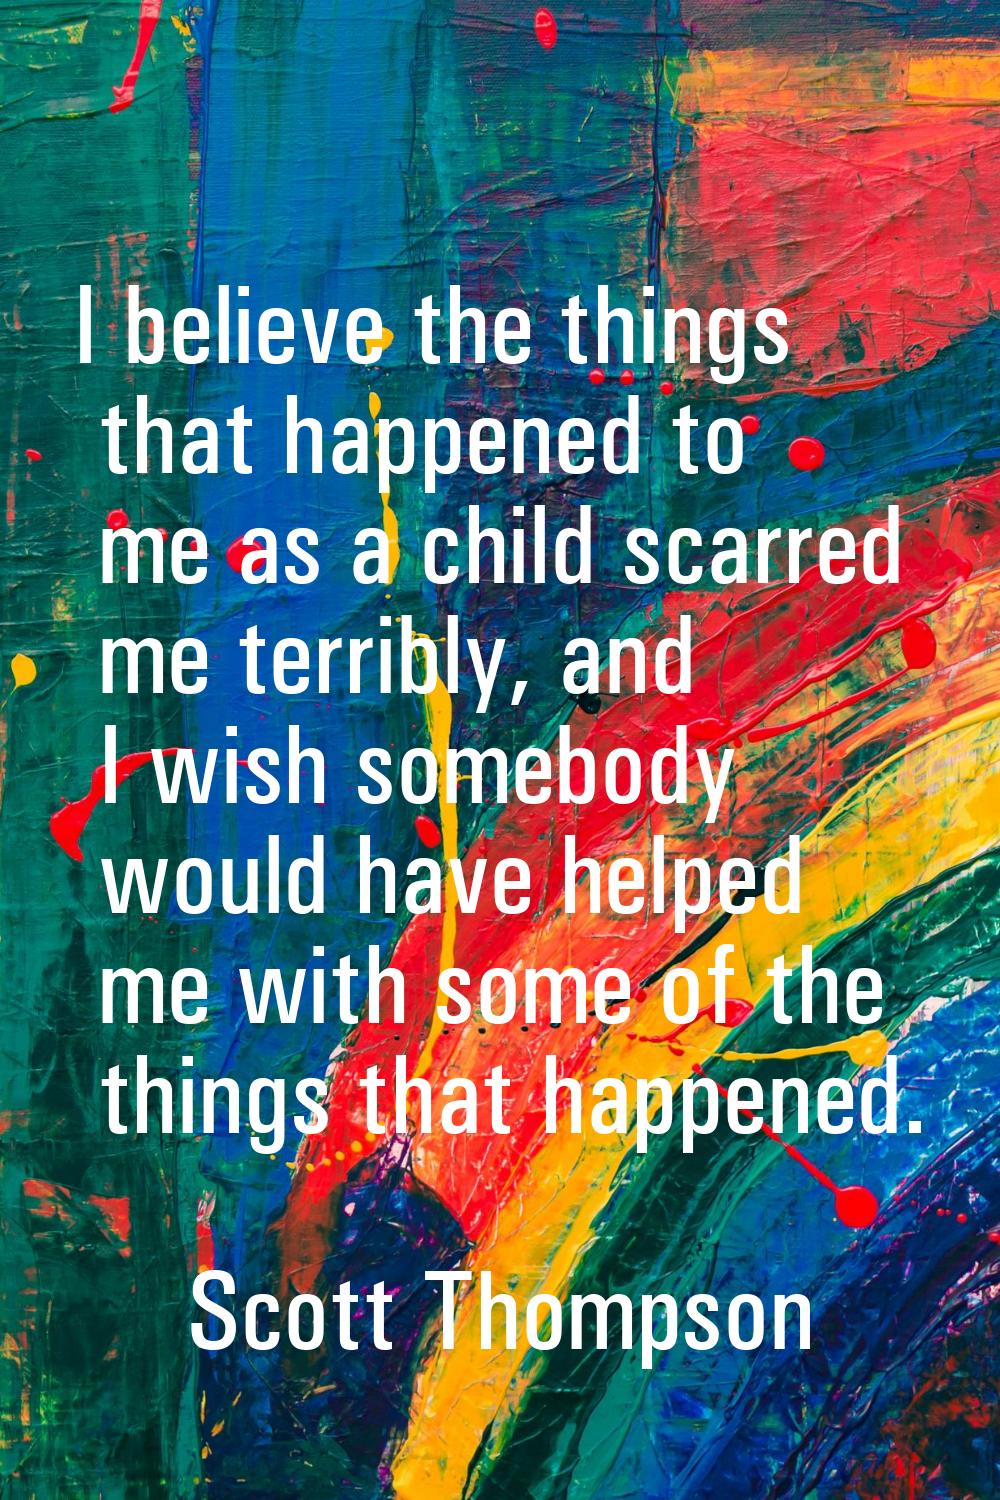 I believe the things that happened to me as a child scarred me terribly, and I wish somebody would 